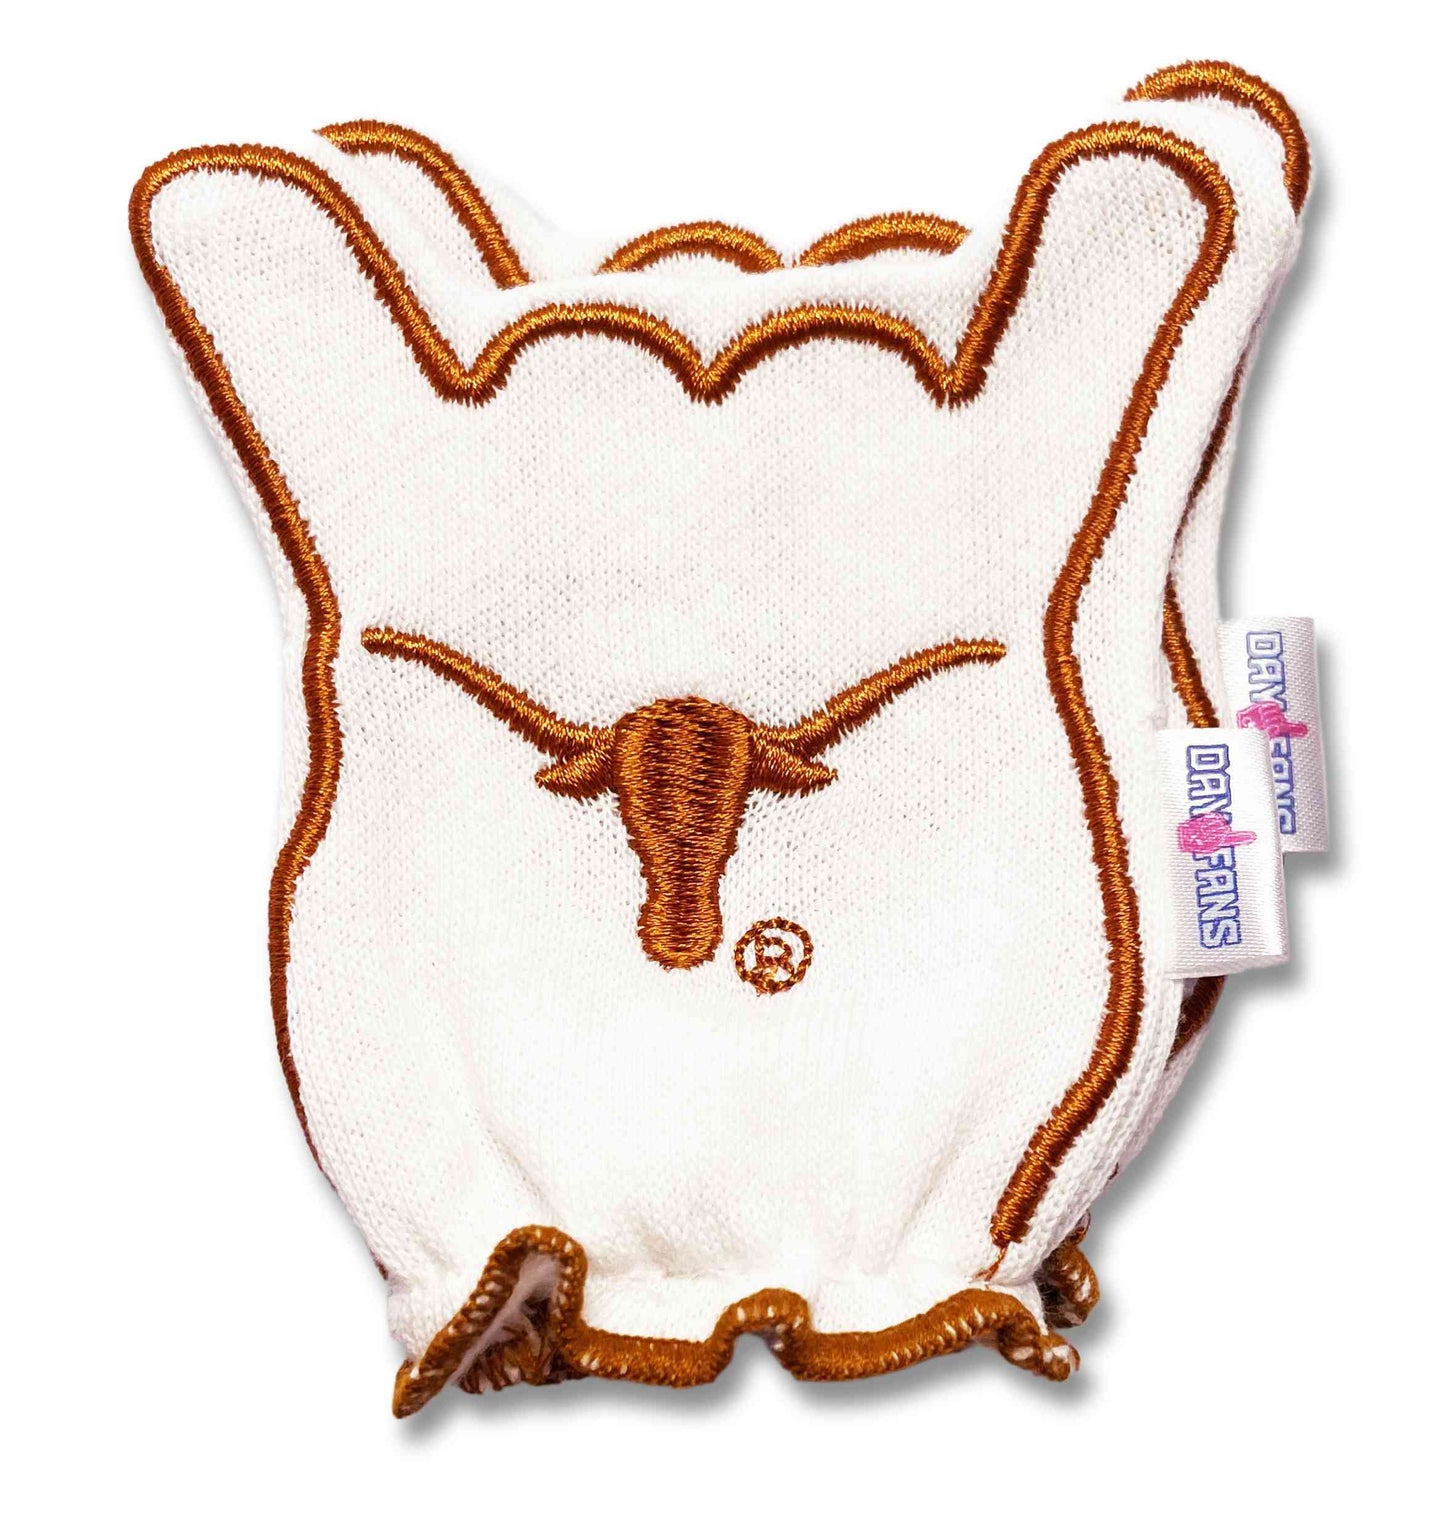 Texas Longhorns Hook Em FanMitts Baby Mittens White Back Pair Stacked